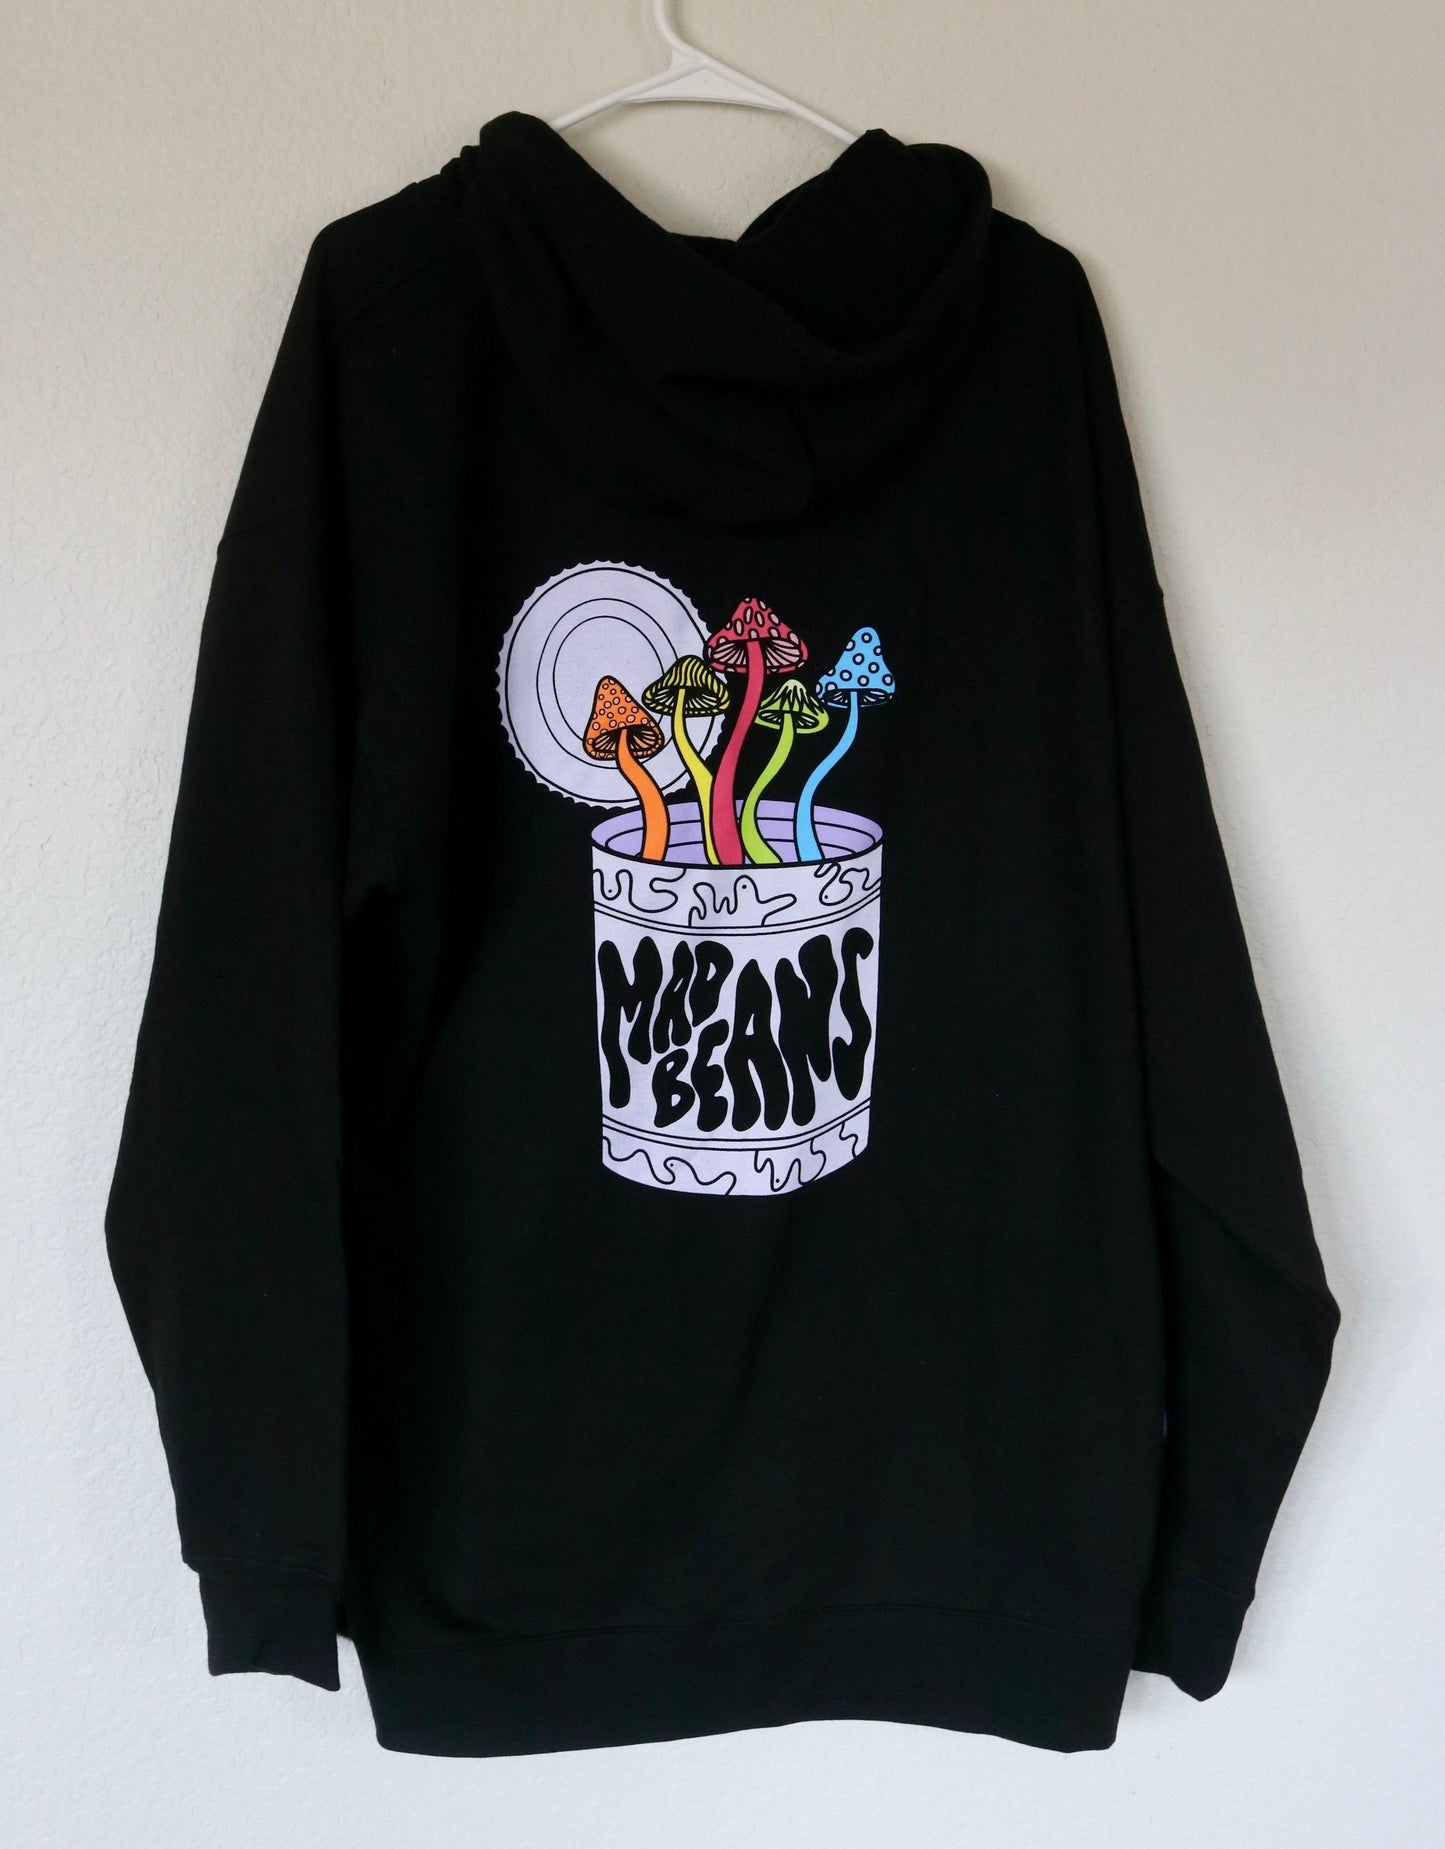 Large MadBeans Hoodie with Mushies Fleece Panels